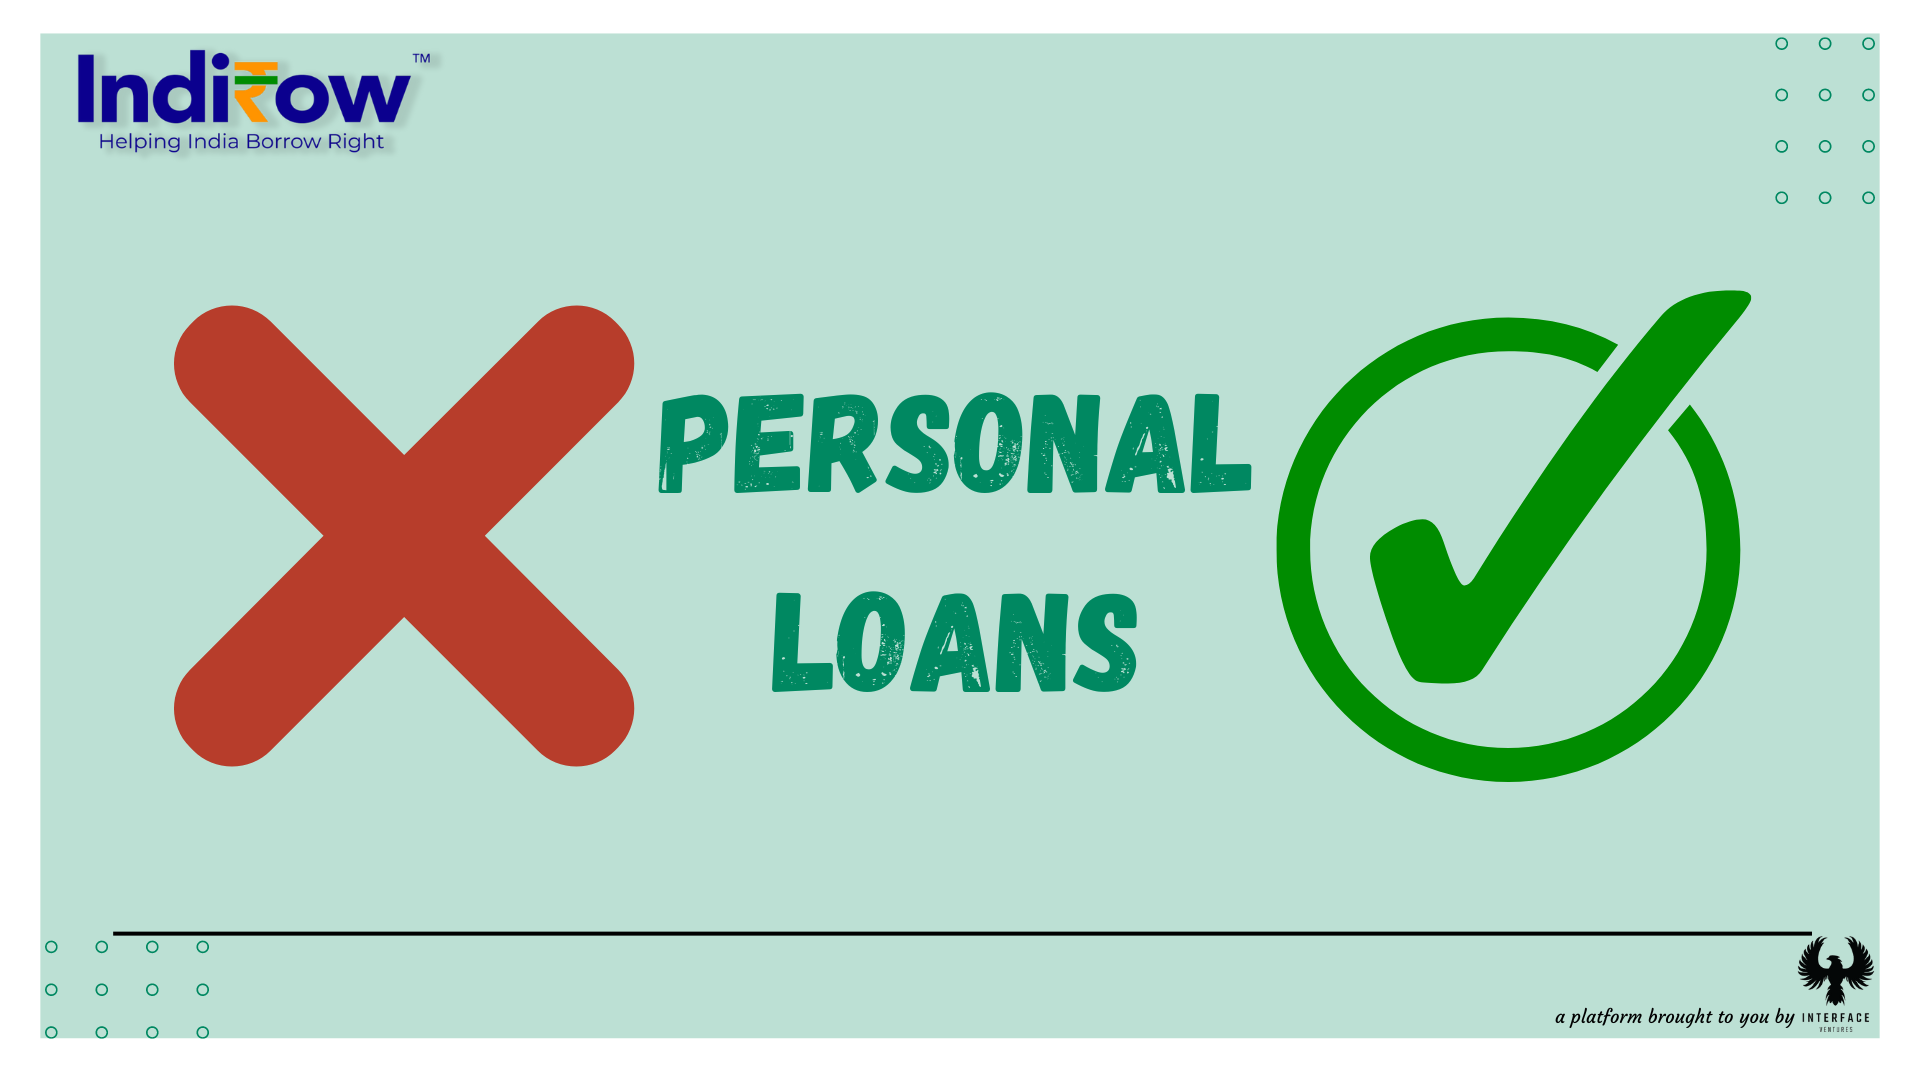 Personal loans in India